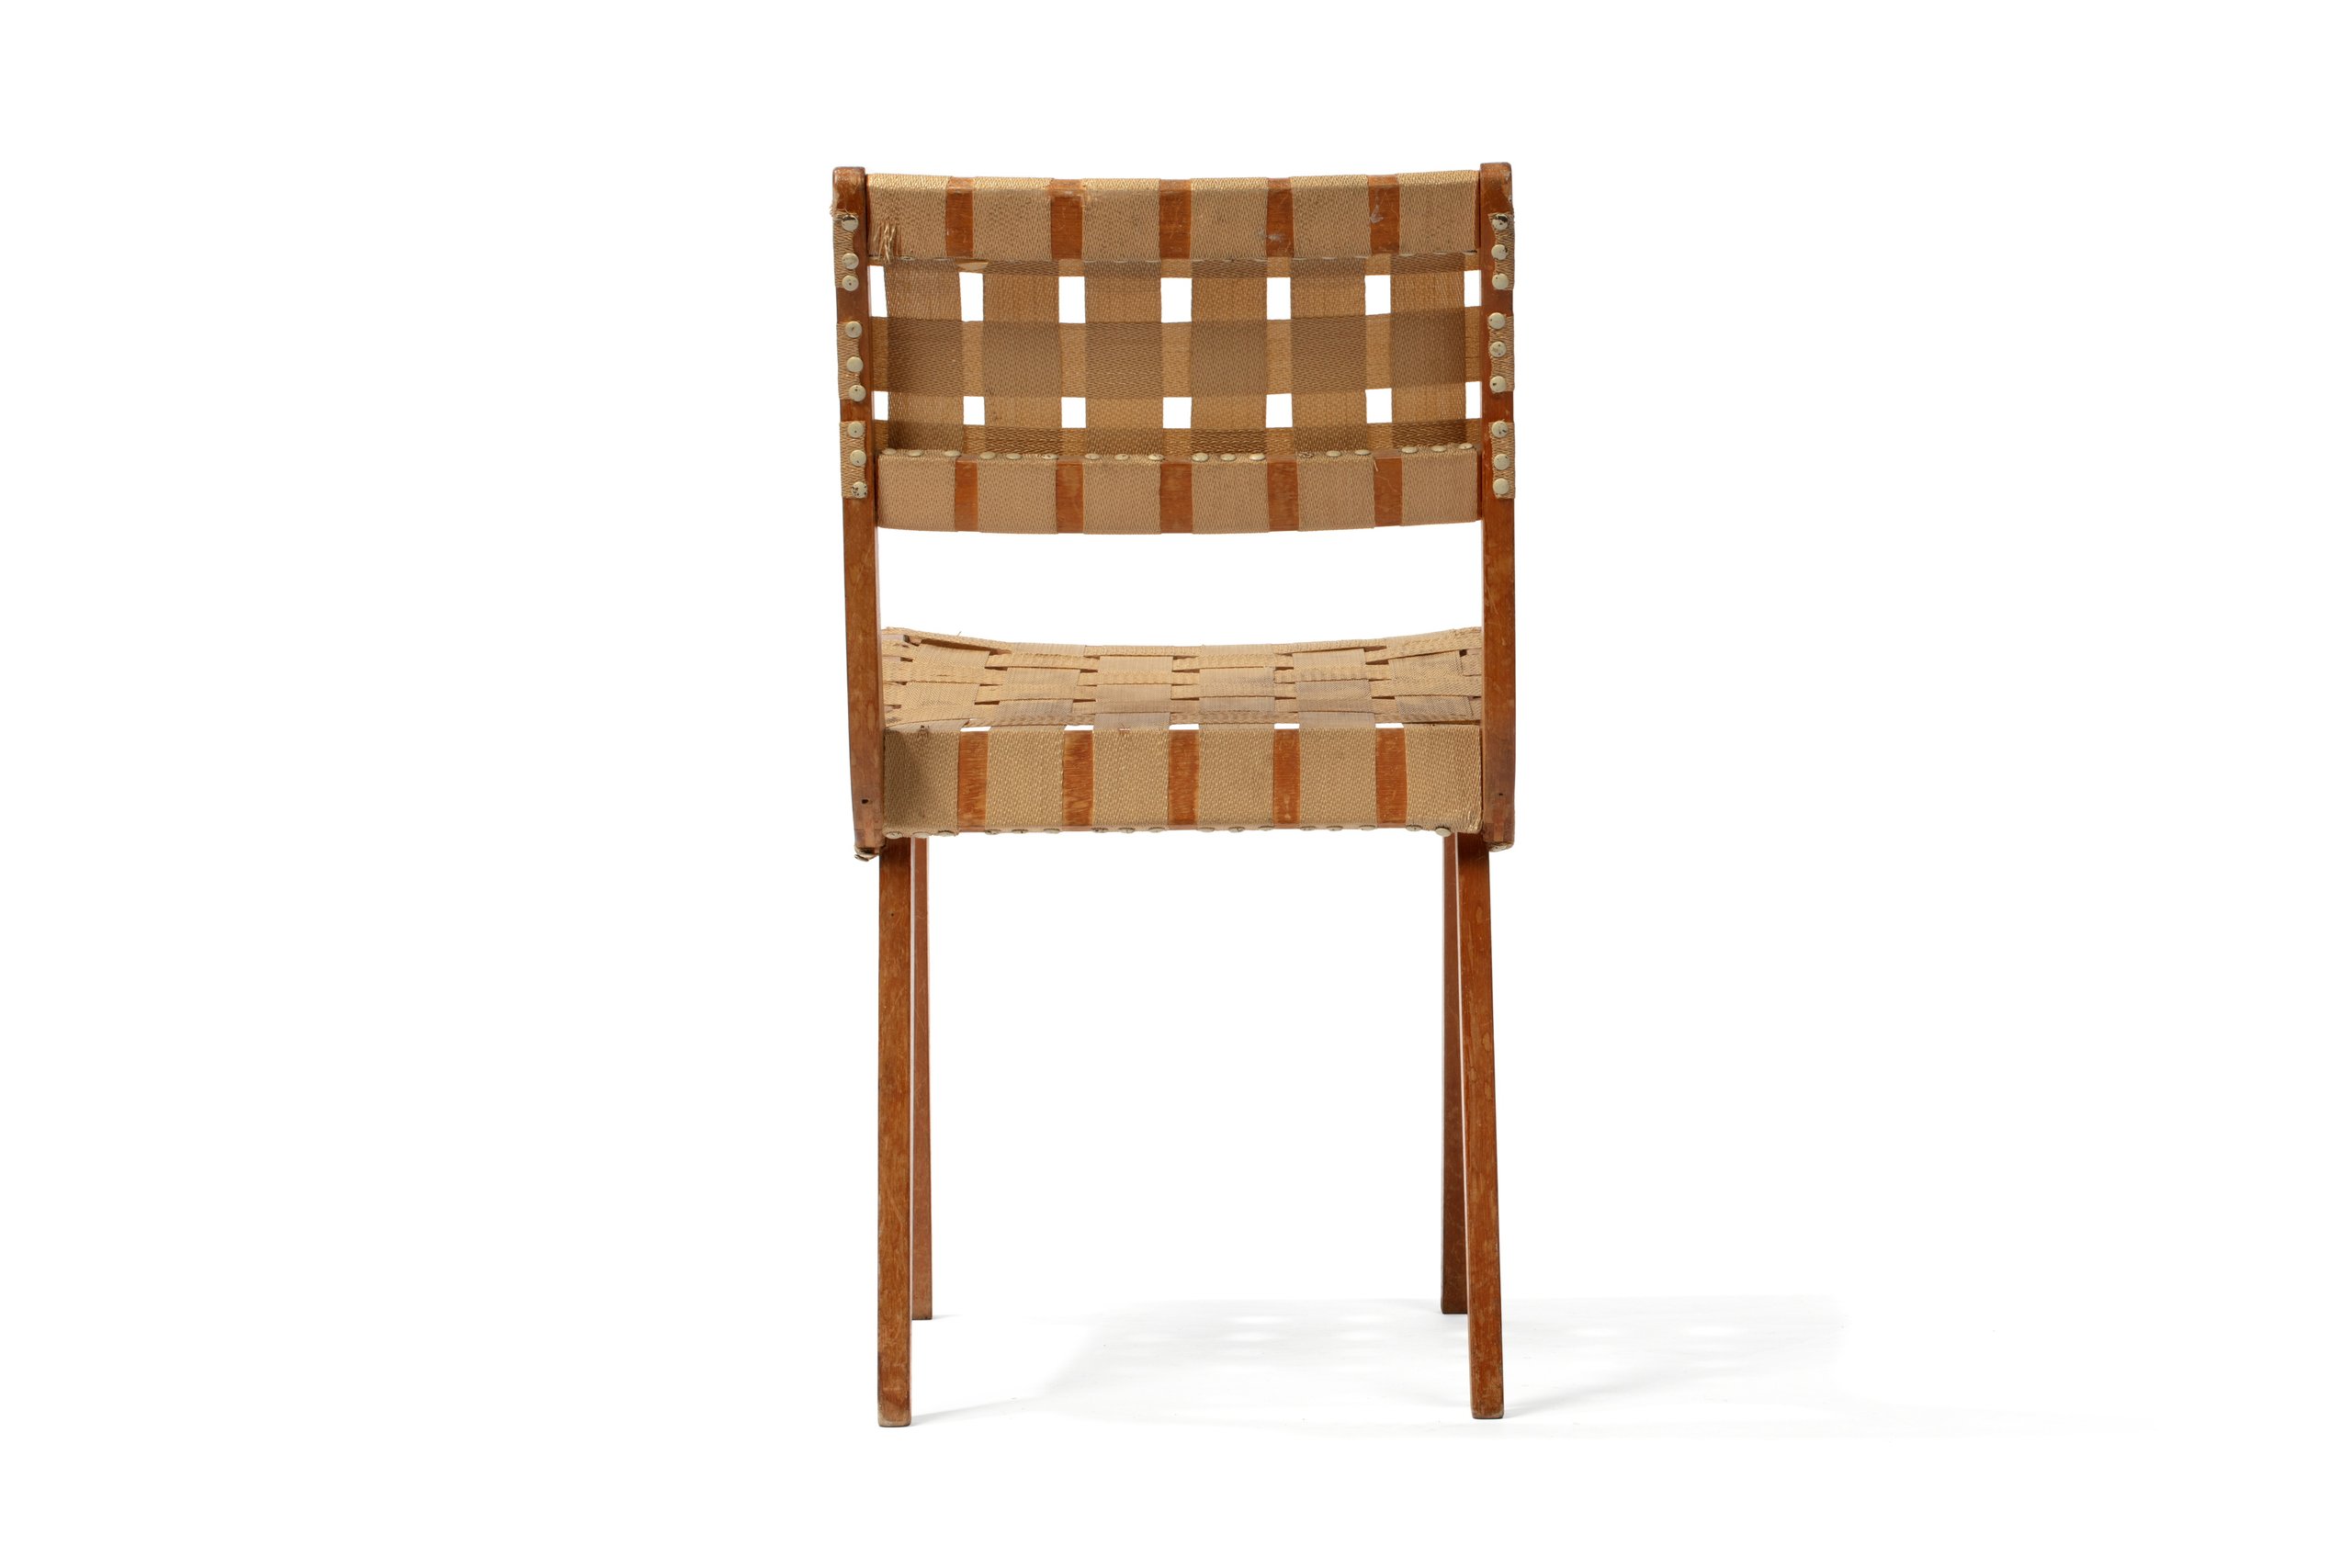 'Parachute' webbing dining chair by Douglas Snelling